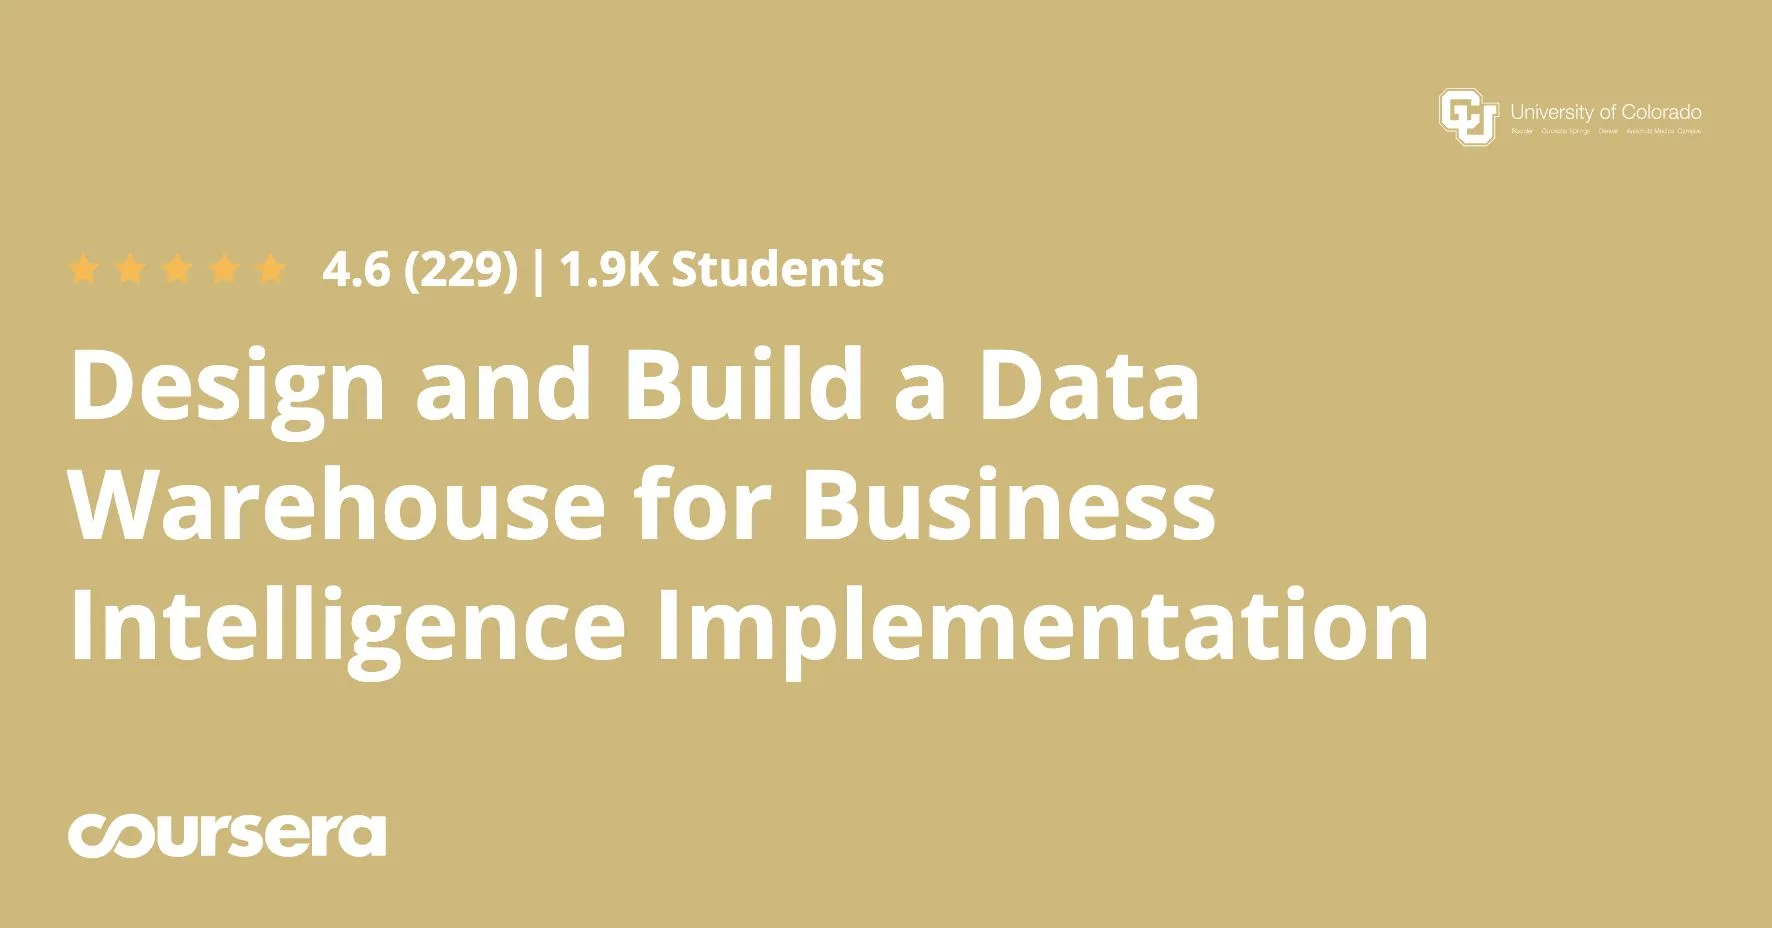 Design and Build a Data Warehouse for Business Intelligence Implementation